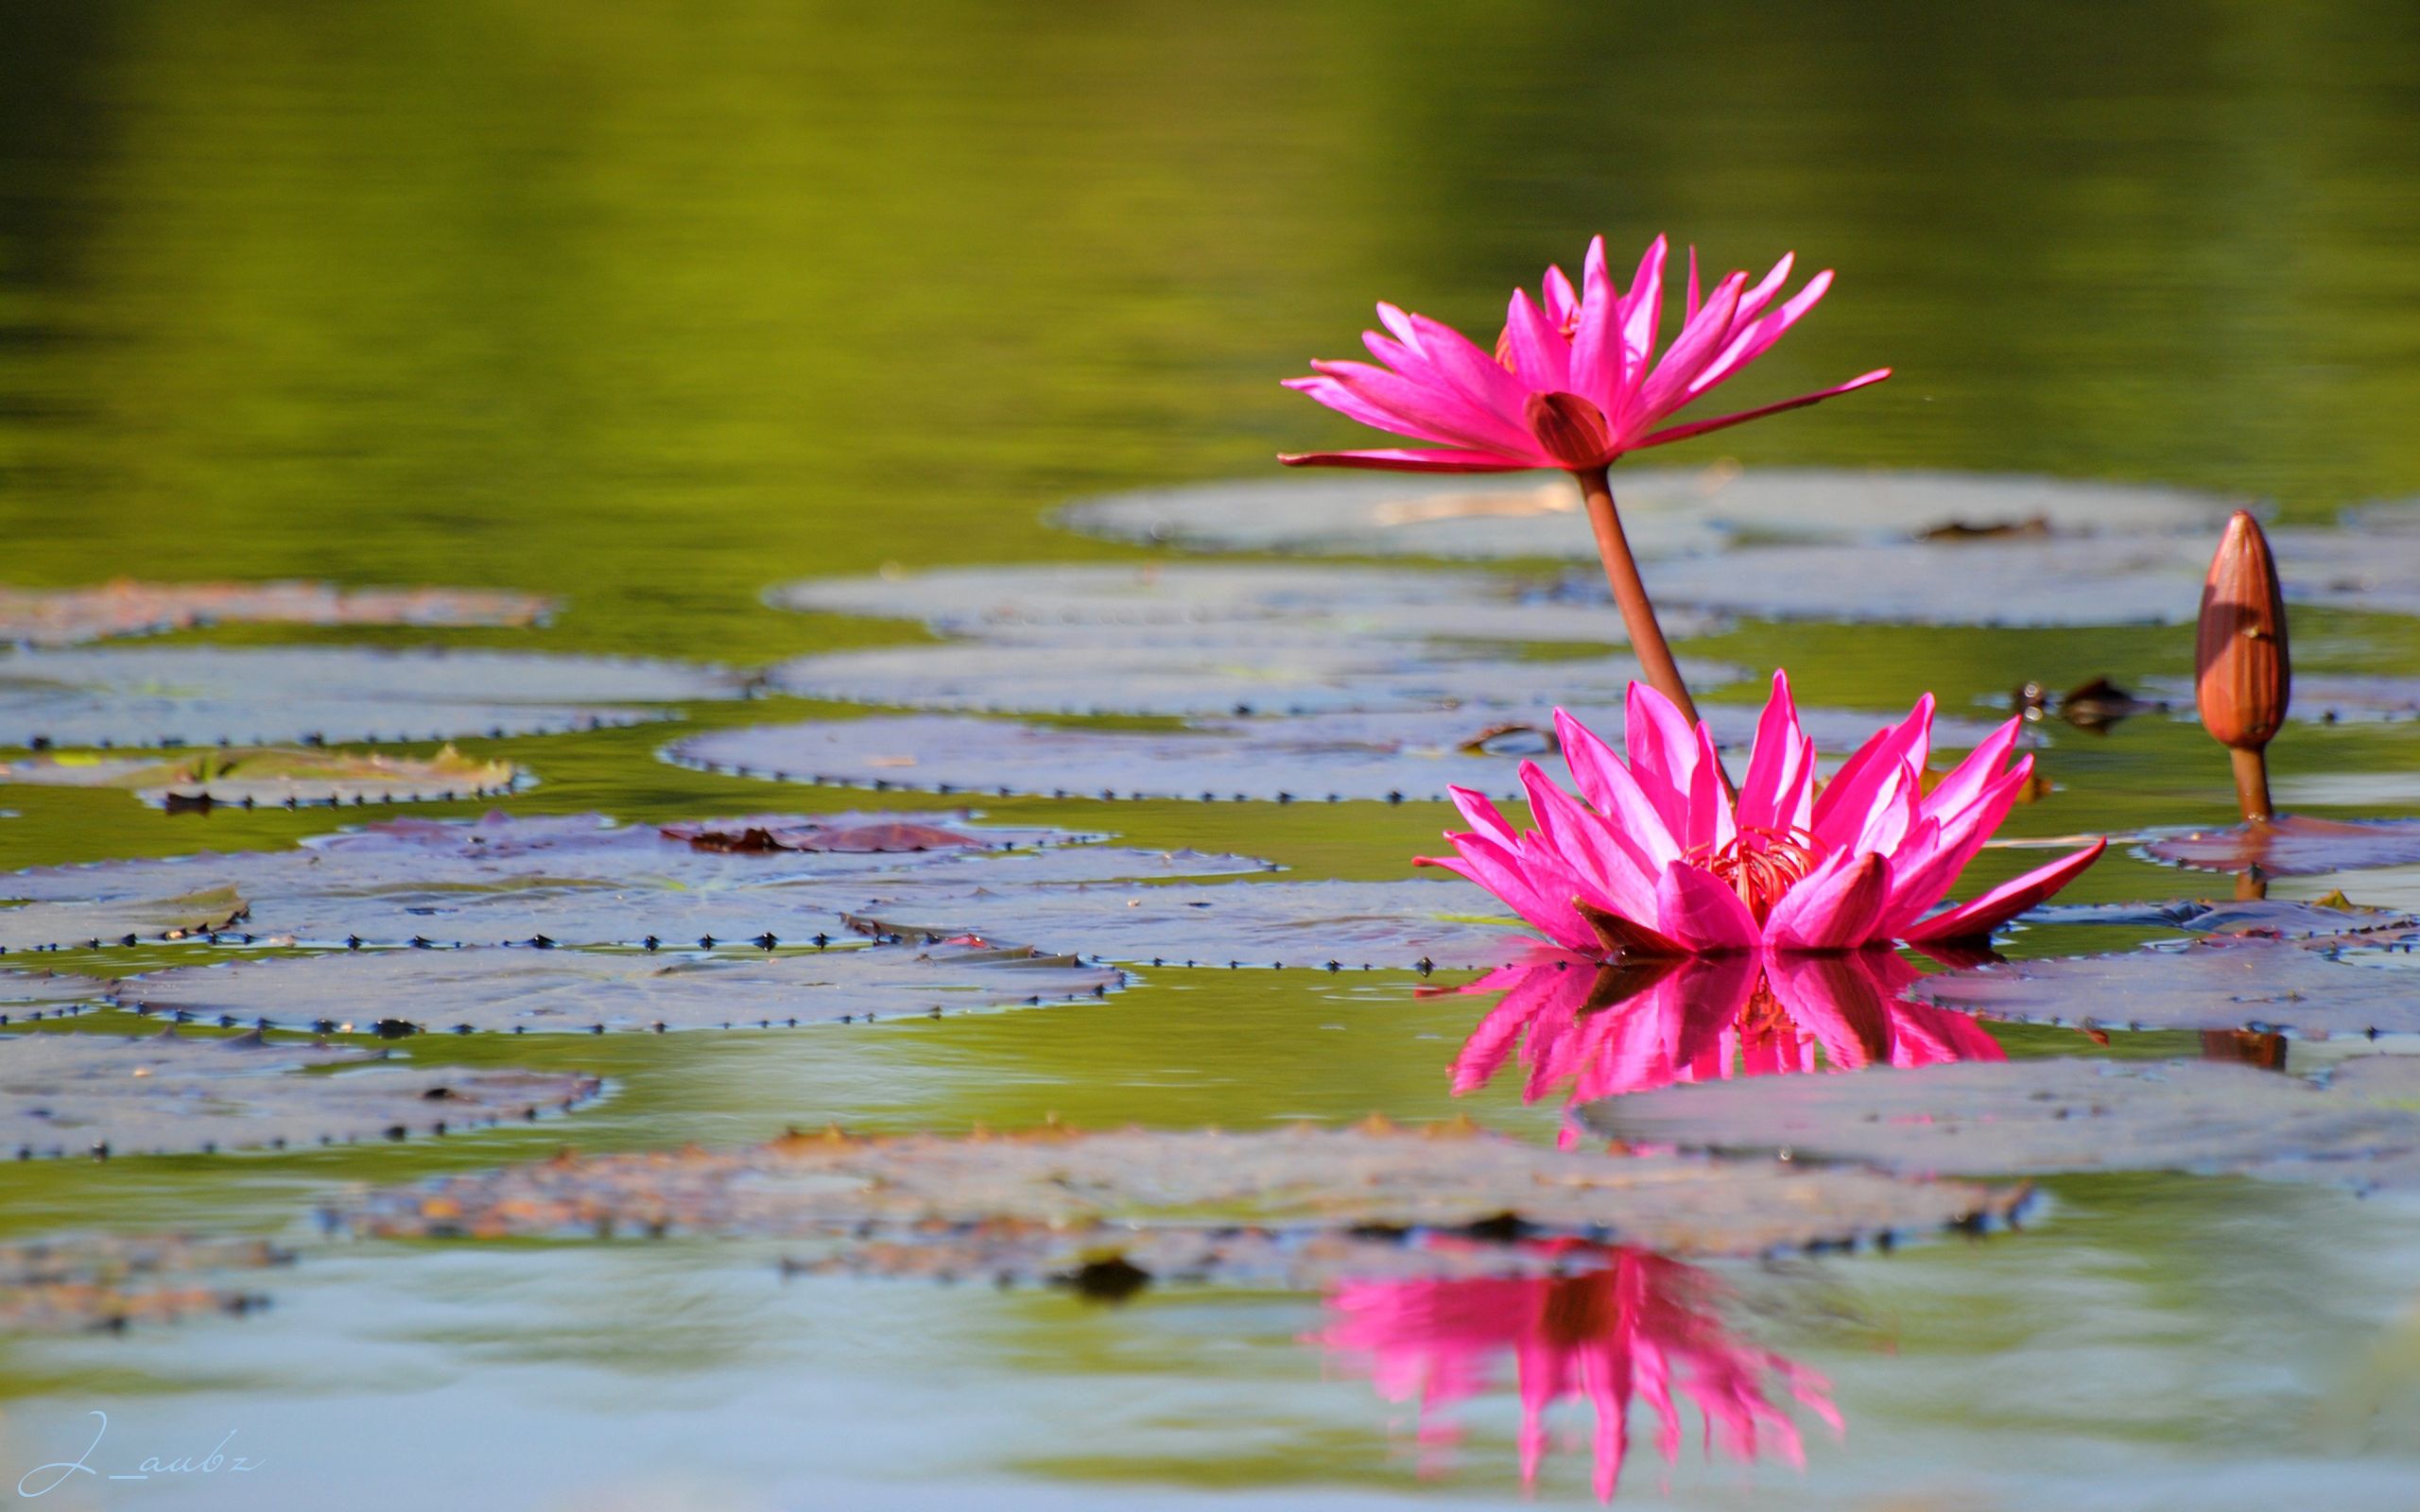 lilies, smooth, water lilies, flowers, water, leaves, reflection, bud, surface